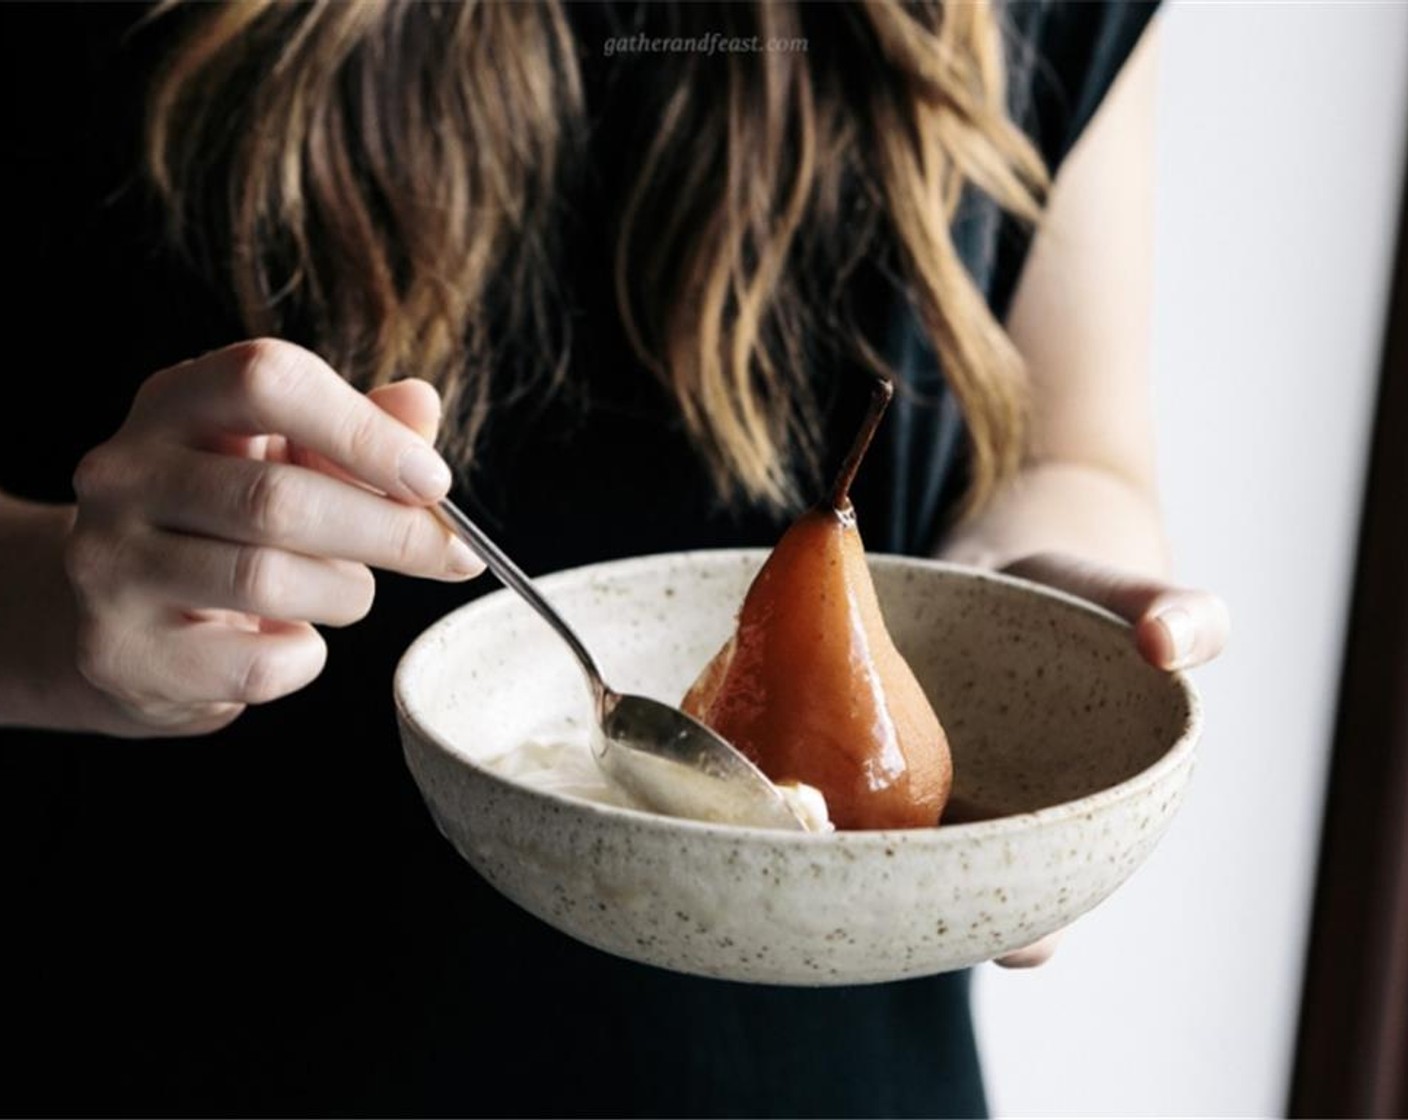 step 8 Lastly, pour the caramel over the poached pears and serve with natural yoghurt. Enjoy!